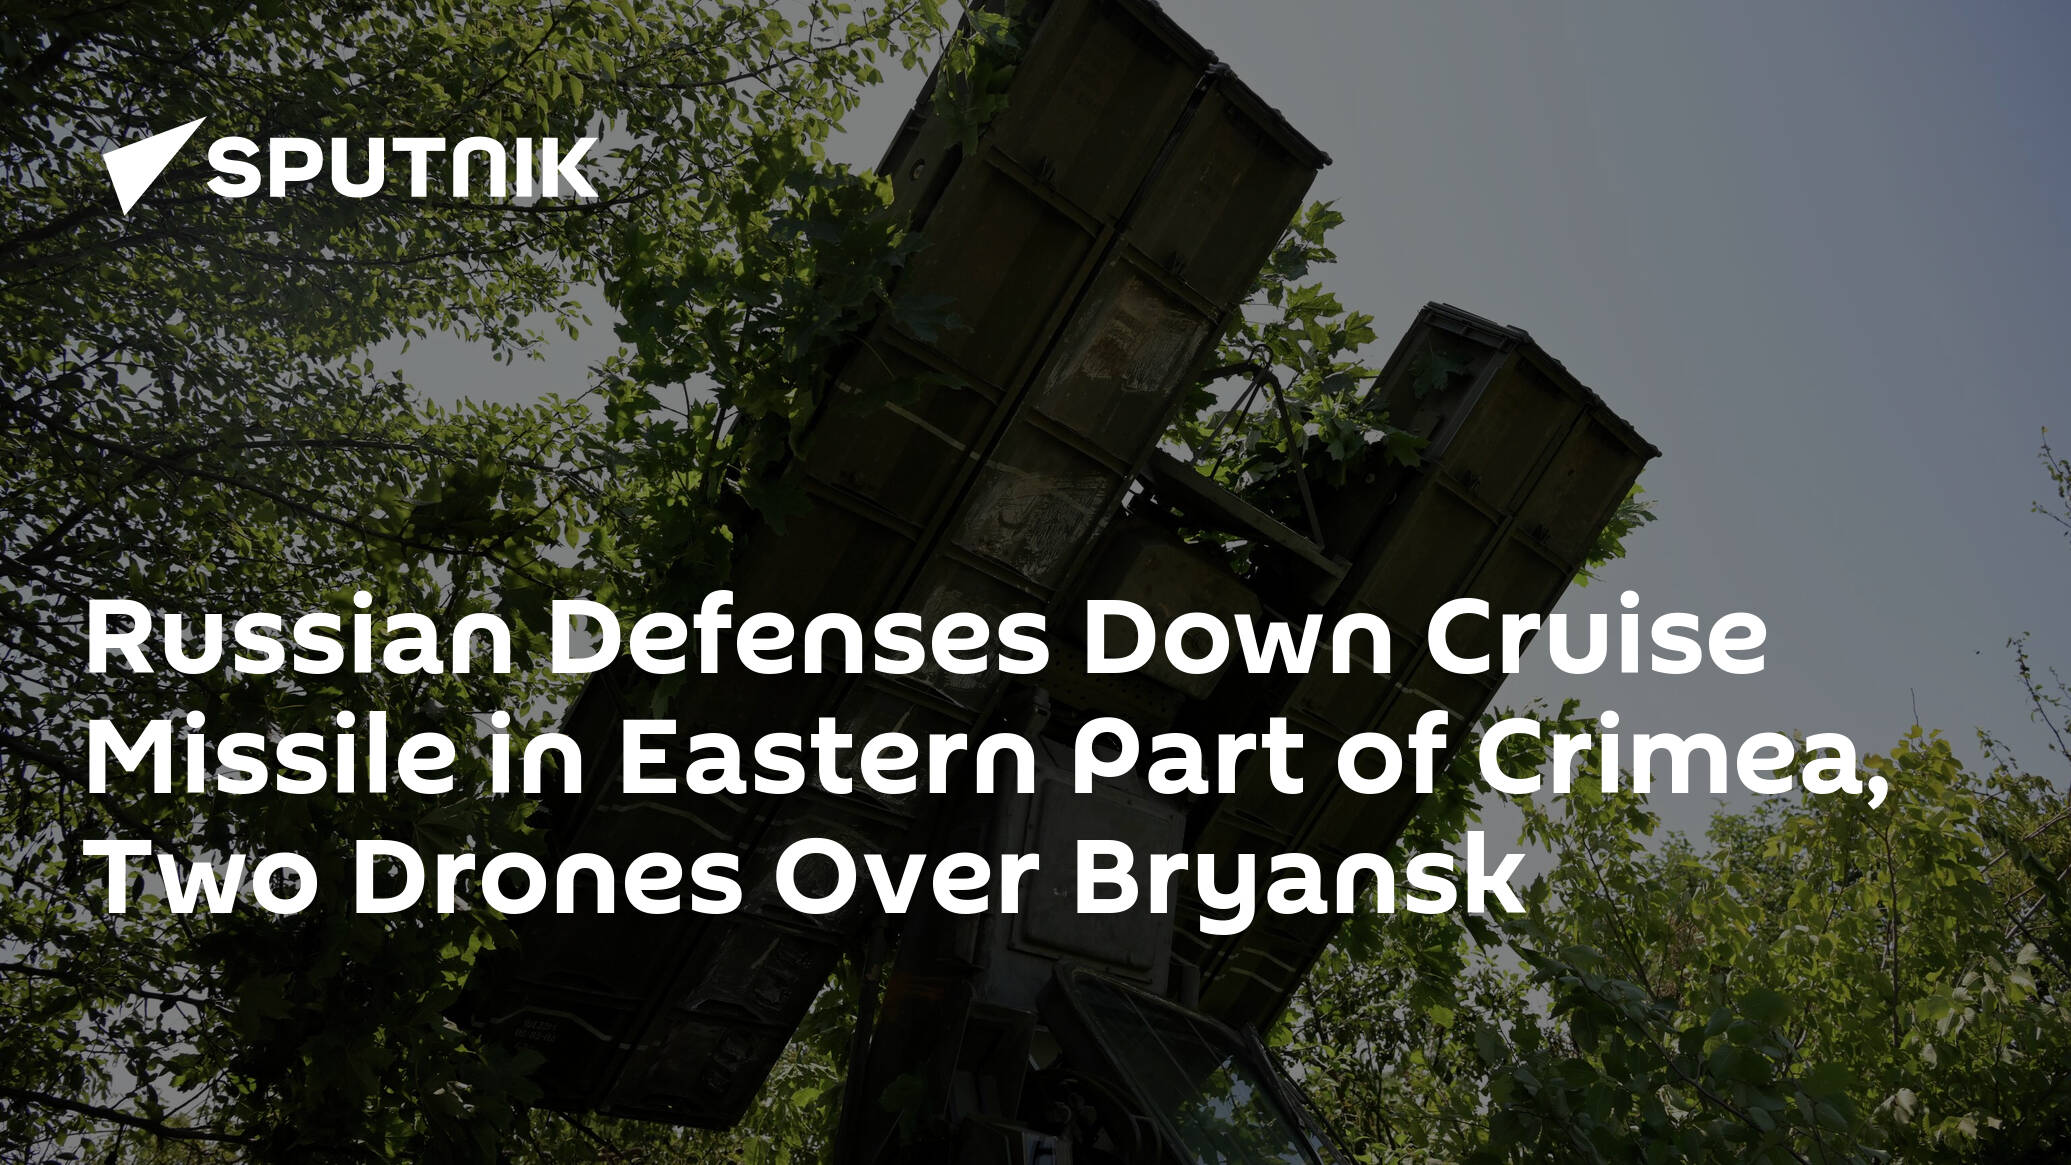 Russian Defenses Down Cruise Missile in Eastern Part of Crimea, Two Drones Over Bryansk